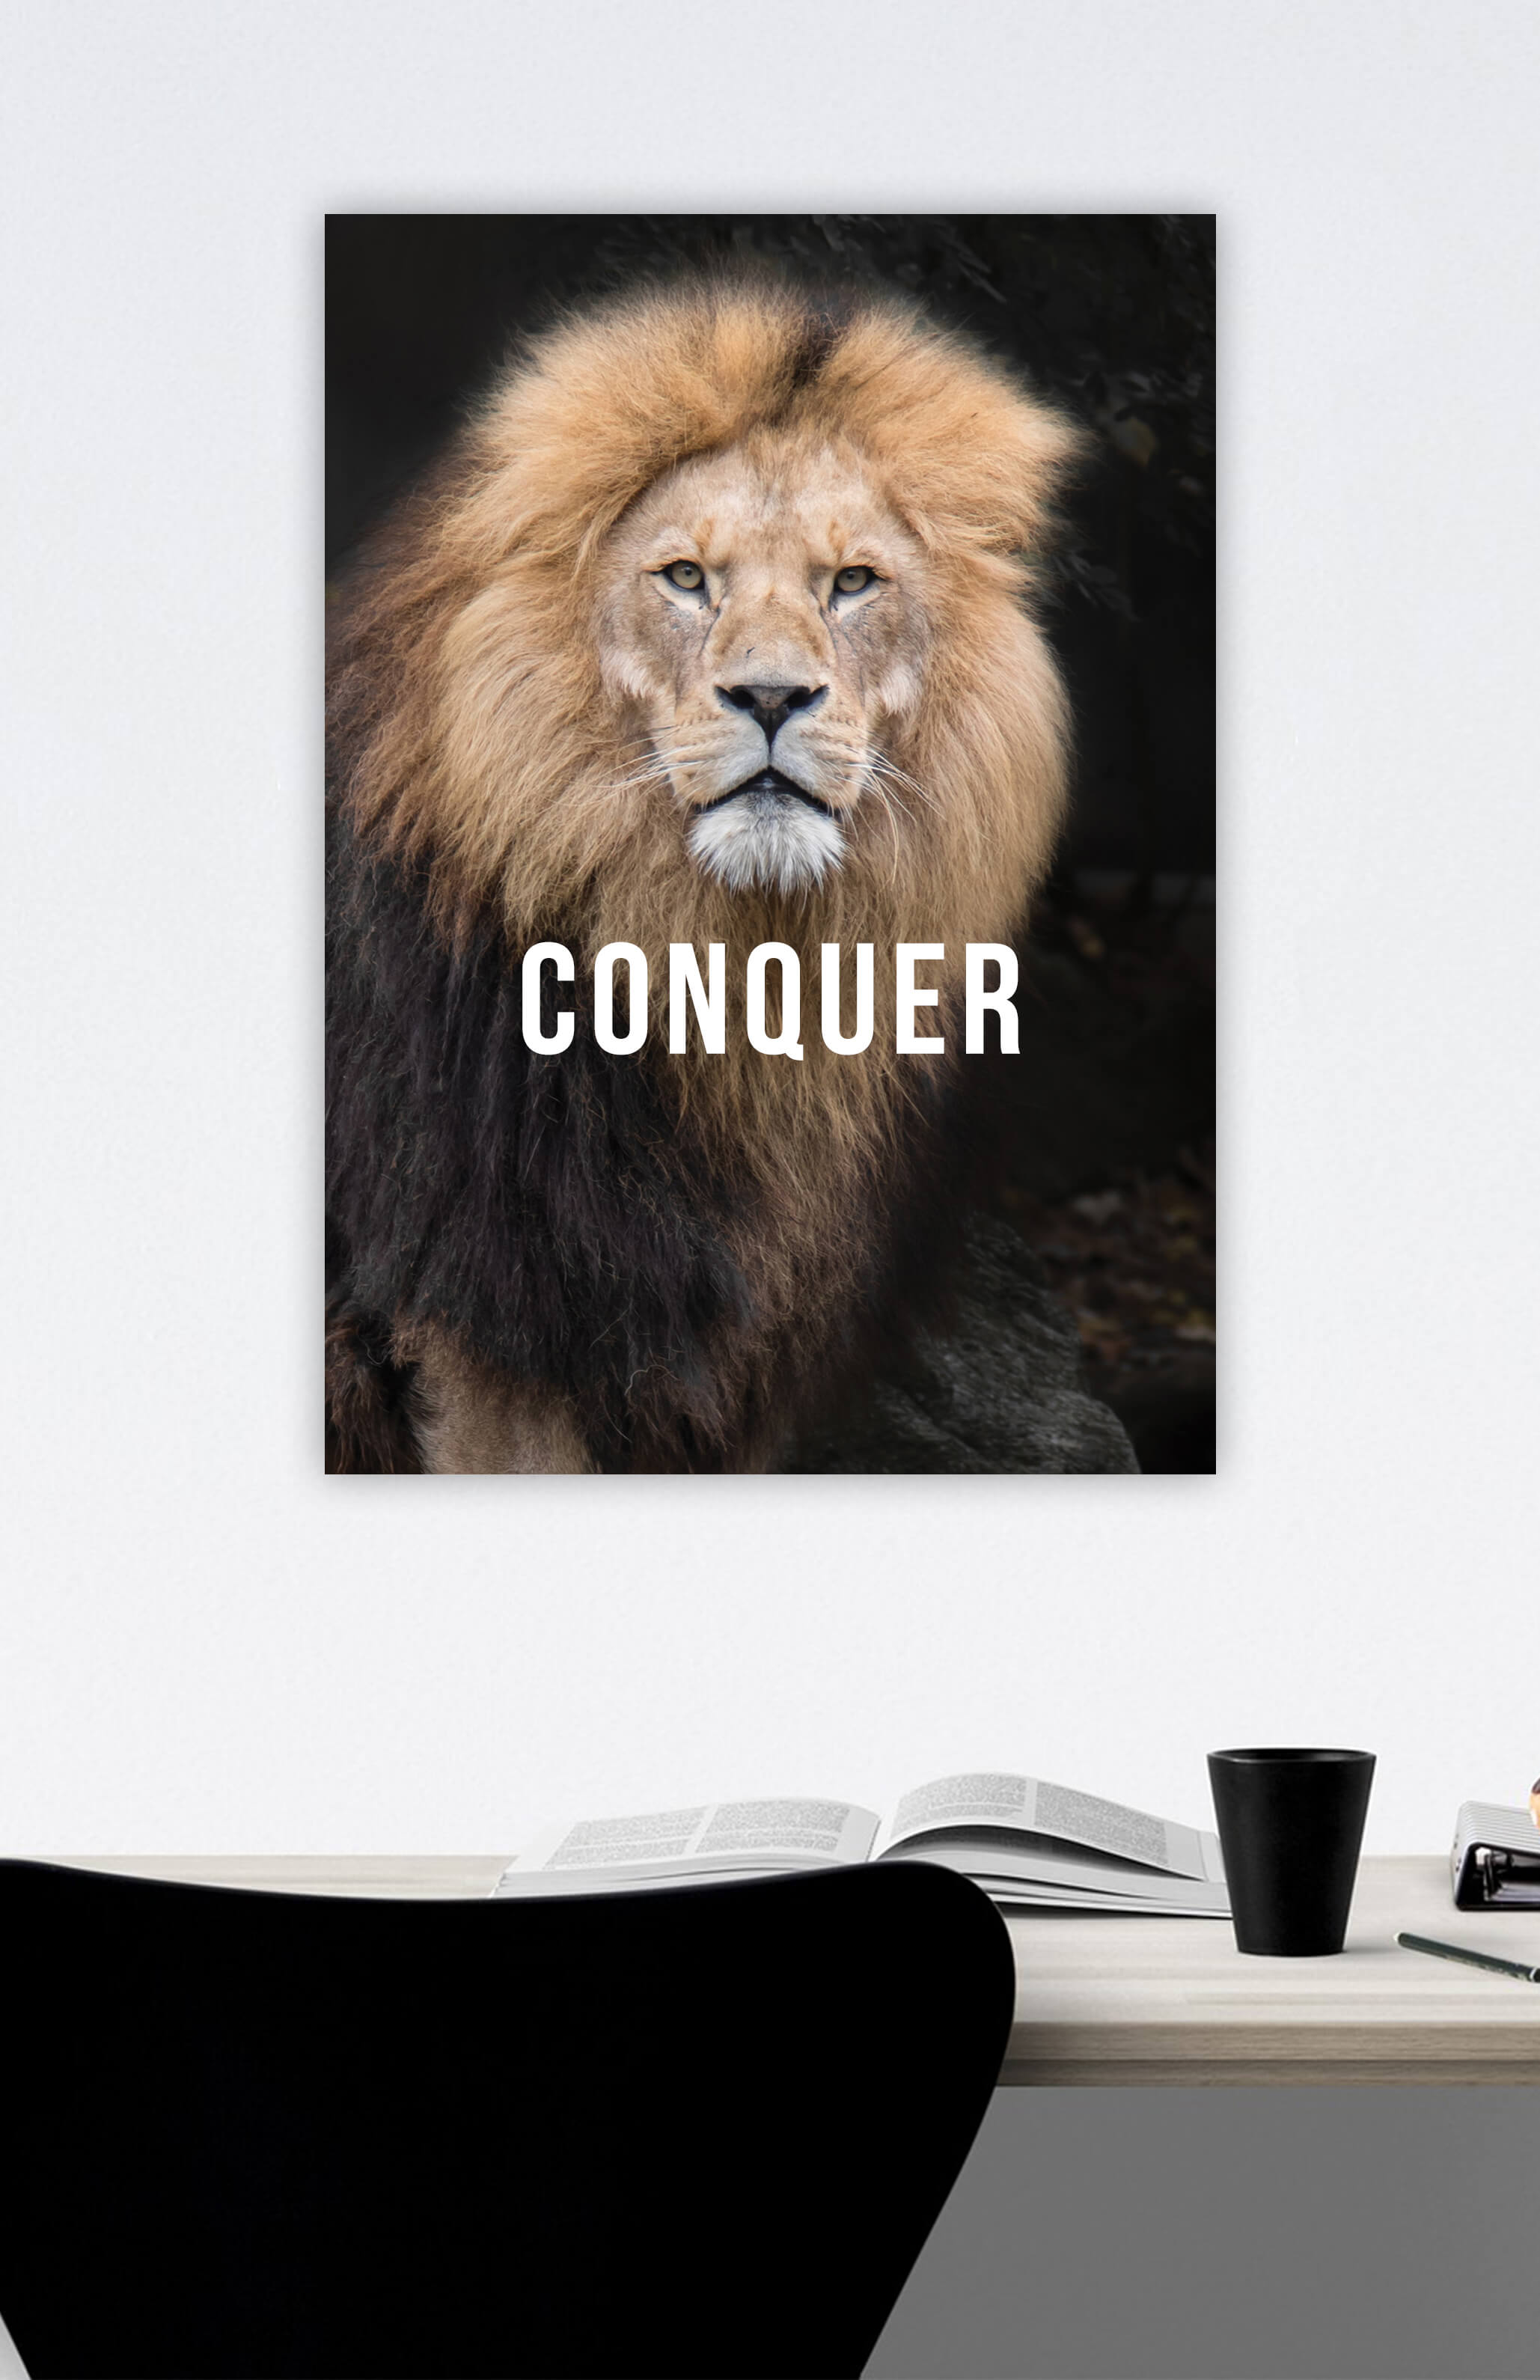 V3 Apparel womens Conquer, Motivational posters, mens inspirational wall artwork and empowering poster quote designs for office, home gym, school, kitchen and living room.